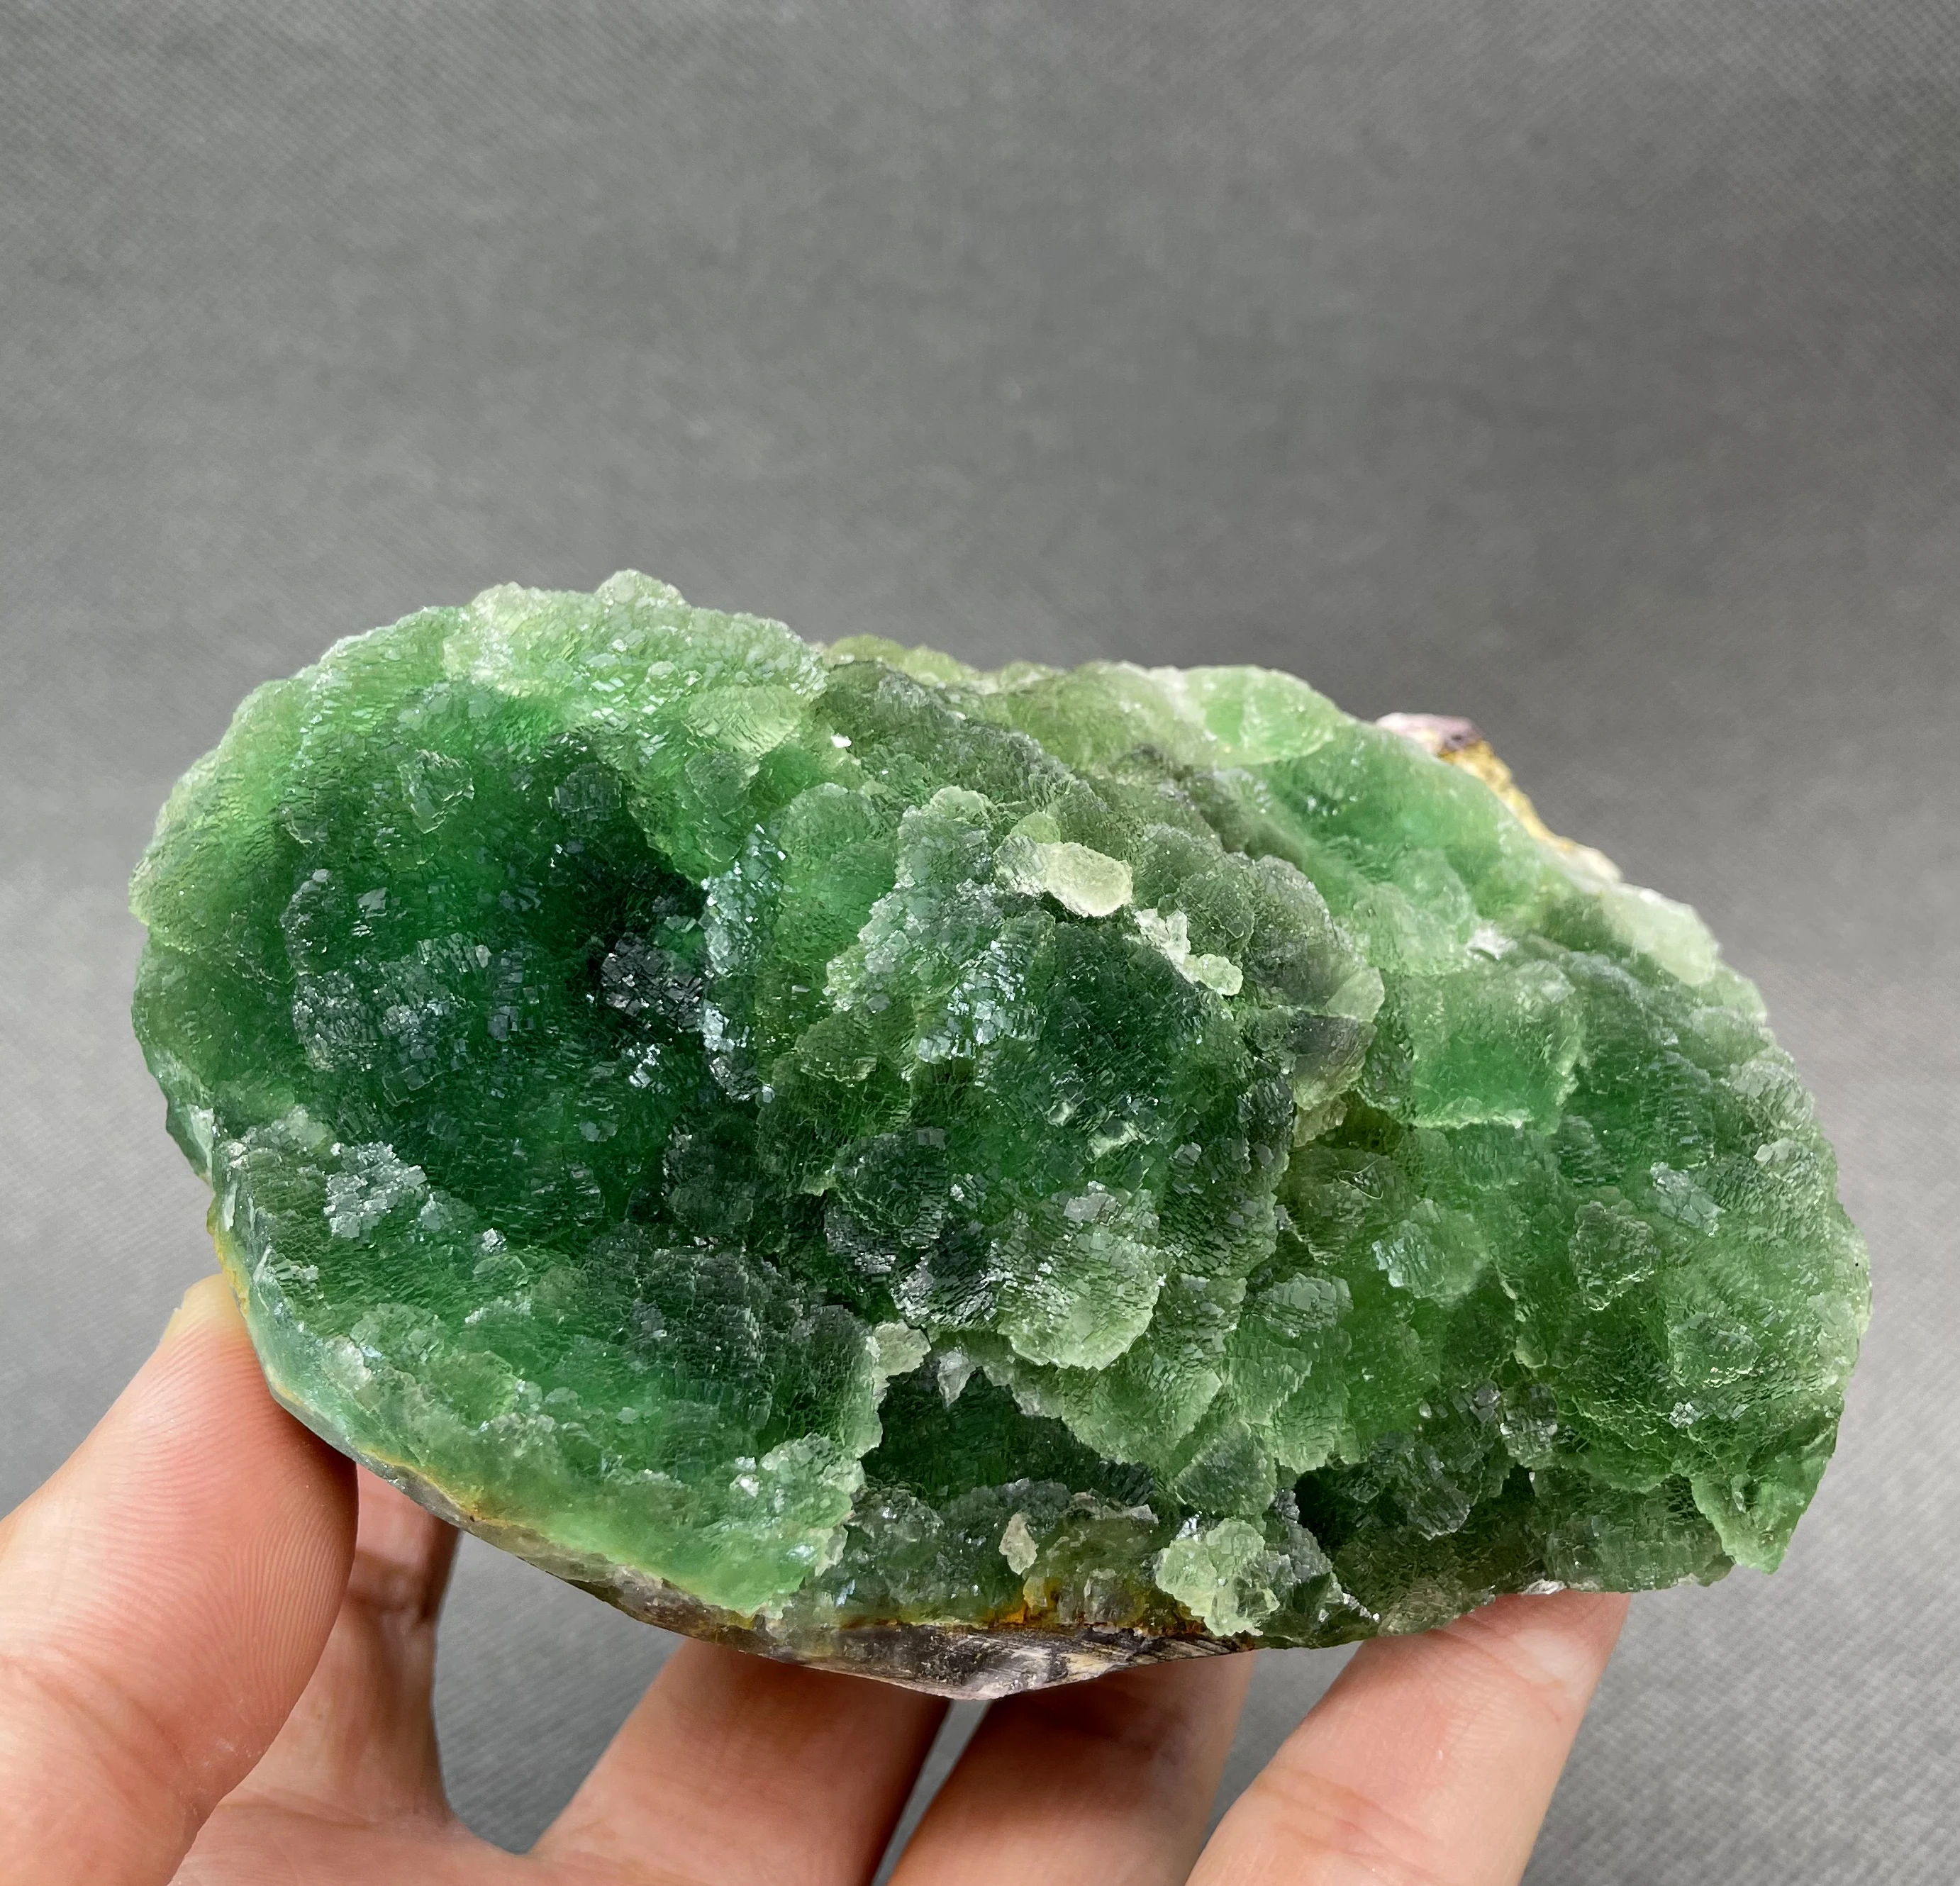 

NEW! 935G Natural rare HENAN Stepped spherical green Fluorite mineral specimens Stones and crystals Healing crystal